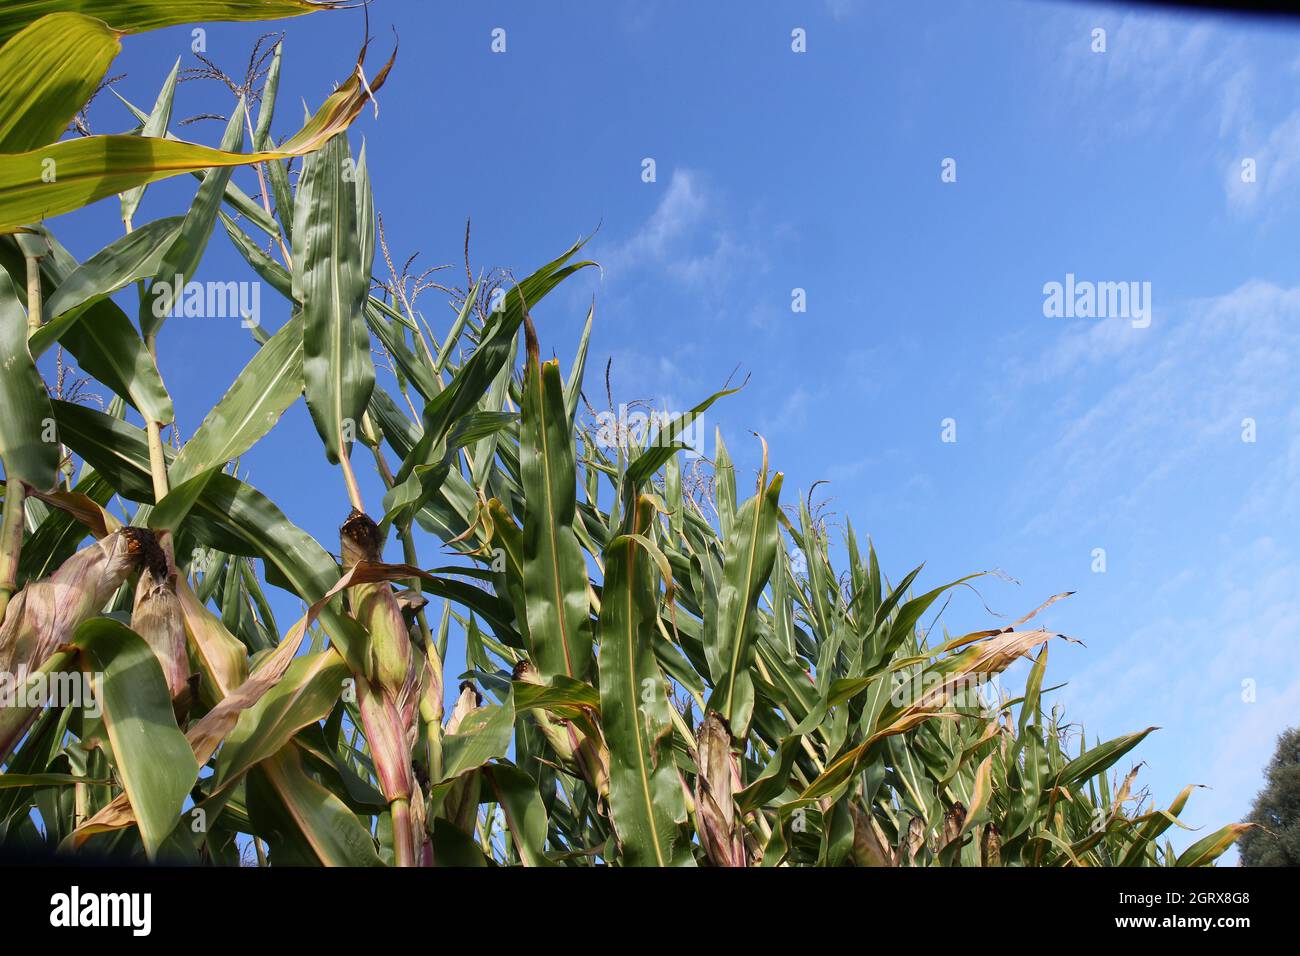 Maize field, diagonal row of maiz inf ront of blue sky for plant-based bezine or animal feed. Stock Photo